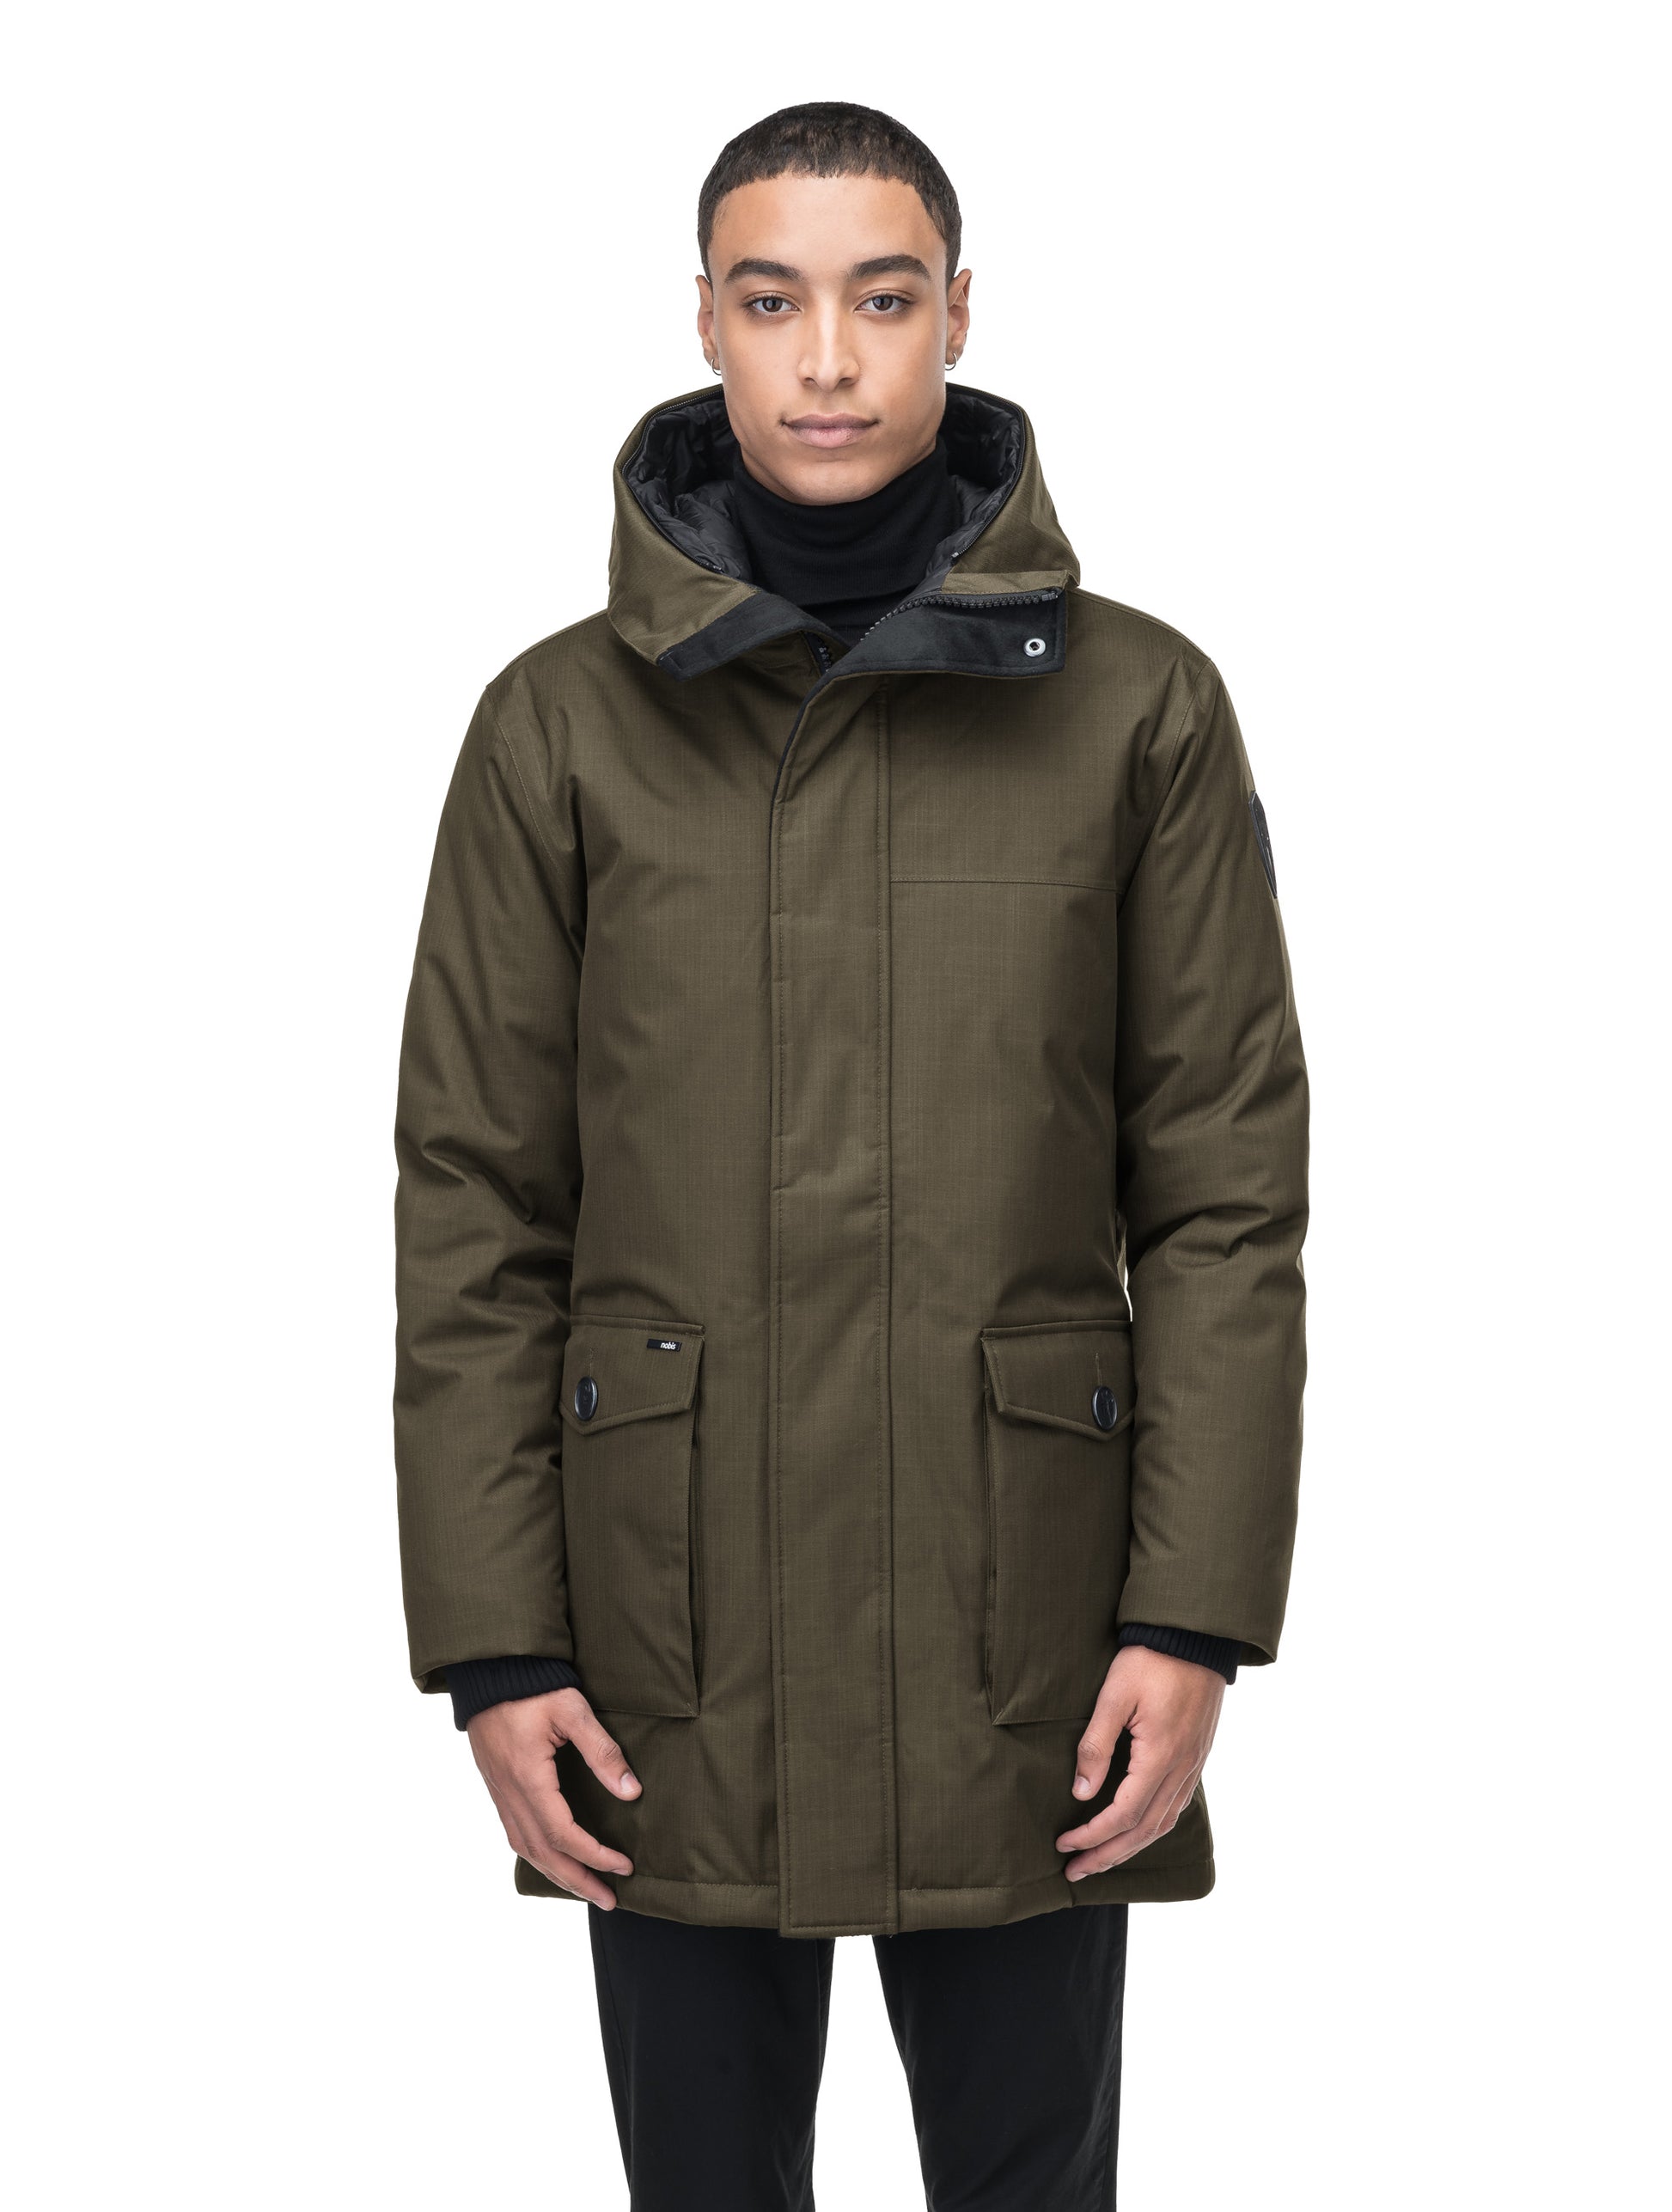 Yves Furless Men's Parka in thigh length, Canadian white duck down insulation, non-removable down-filled hood, flap pockets at waist, centre-front two-way zipper with magnetic wind flap, and elastic ribbed cuffs, in CH Fatigue